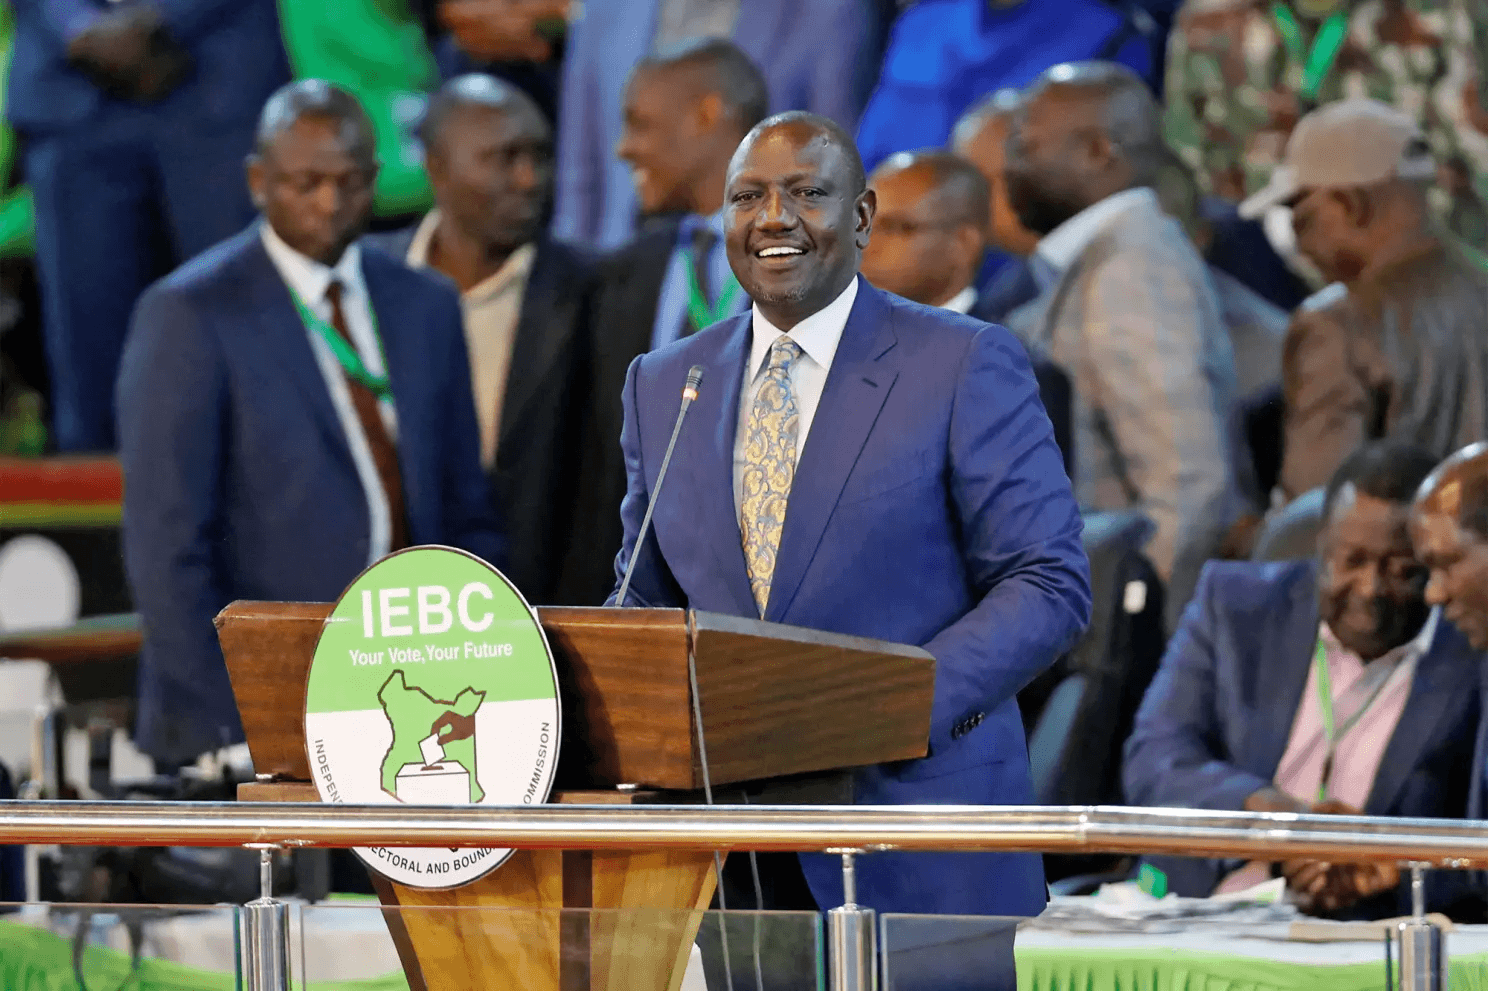 Kenya's Deputy President William Ruto and presidential candidate for the United Democratic Alliance (UDA) and Kenya Kwanza political coalition, speaks after being declared the winner of Kenya's presidential election. REUTERS/Thomas Mukoya